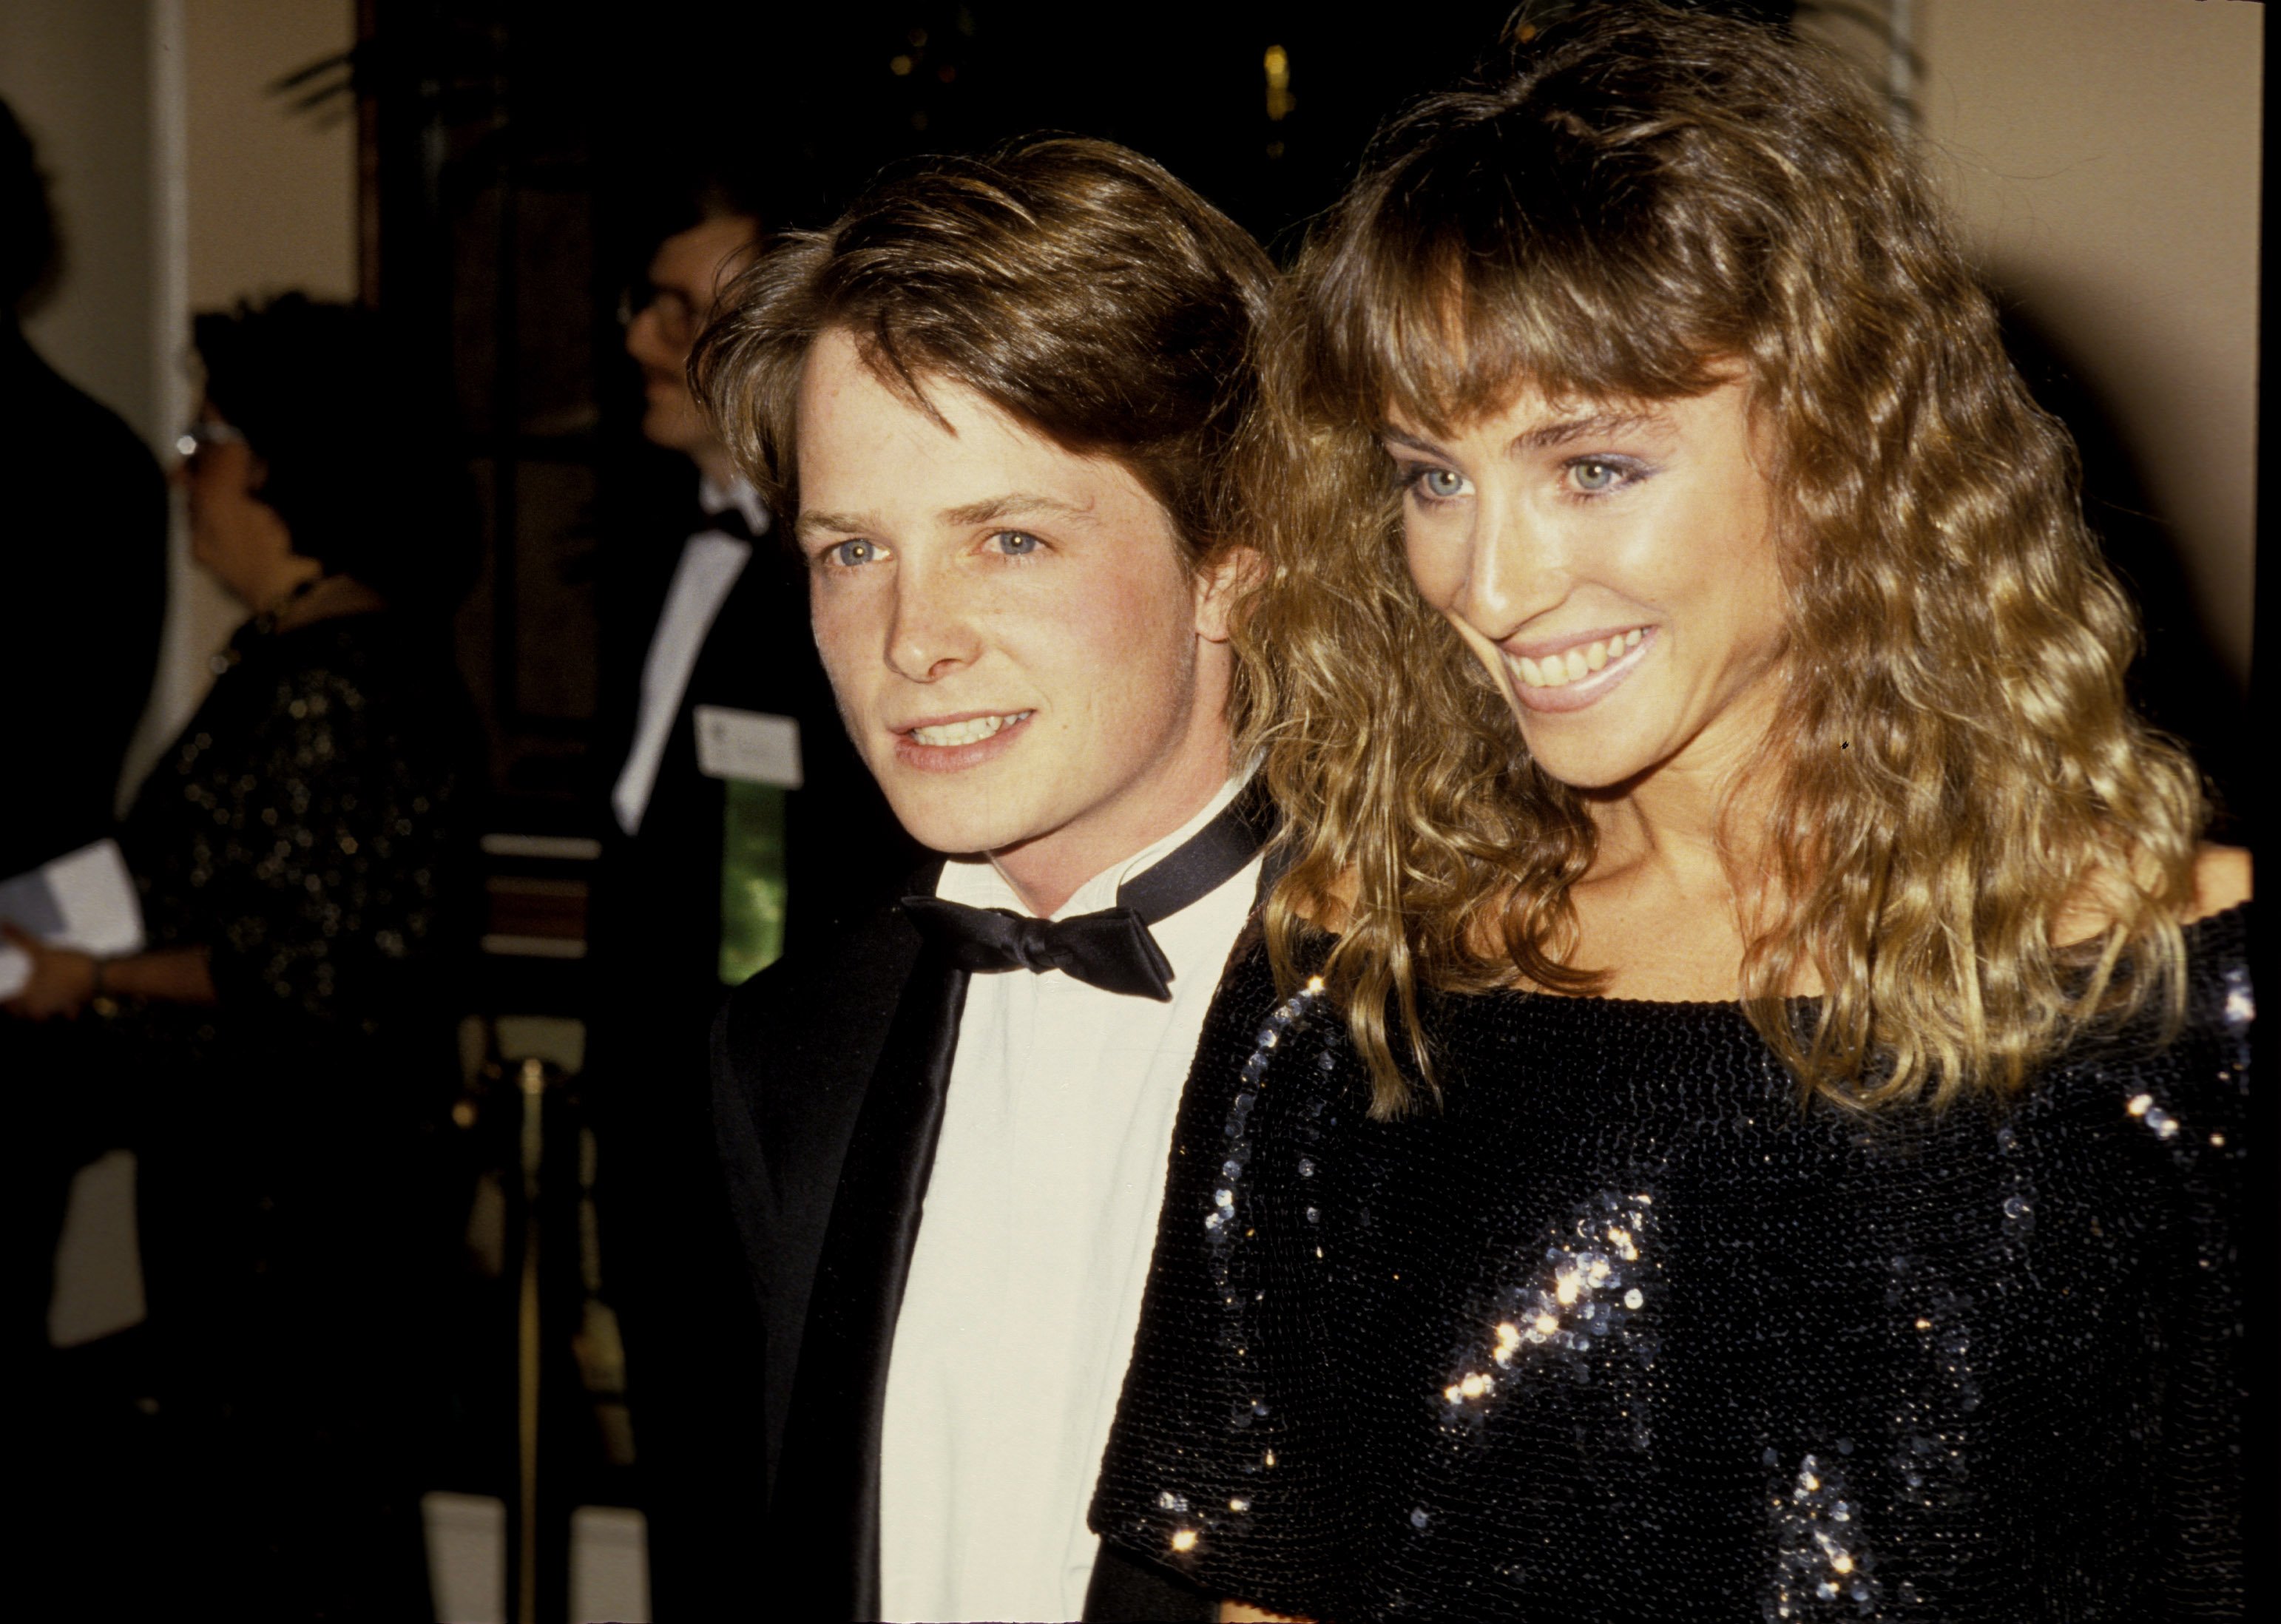 Michael J. Fox and Tracy Pollan at Beverly Hilton Hotel in Beverly Hills, California, United States | Source: Getty Images